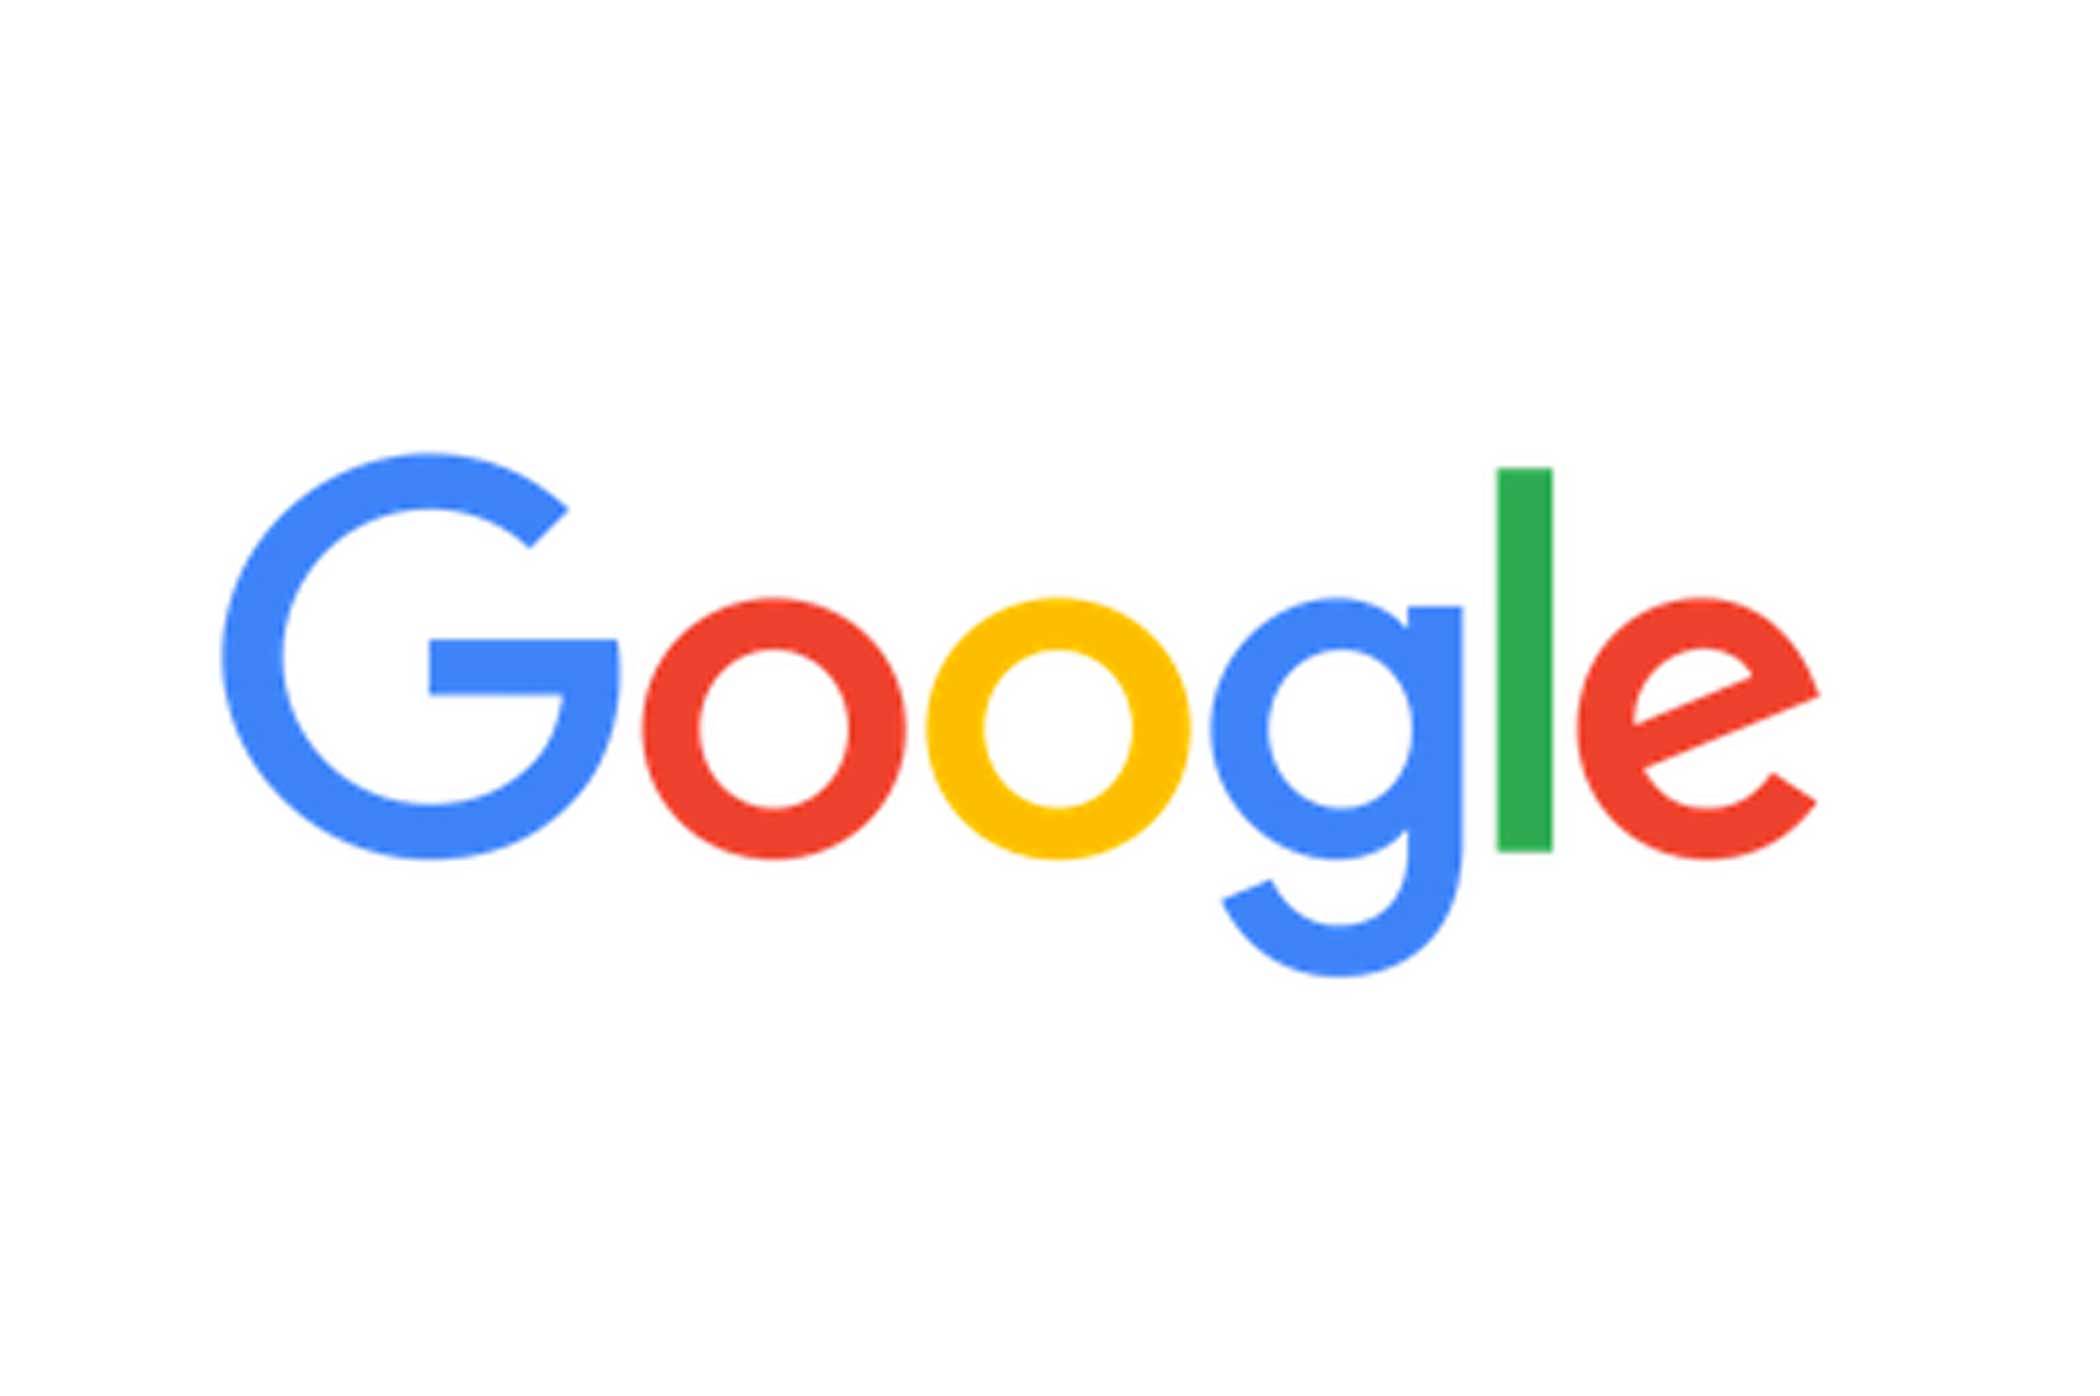 Easter Egg Logo - Google Search Has a Cool New Easter Egg | Time